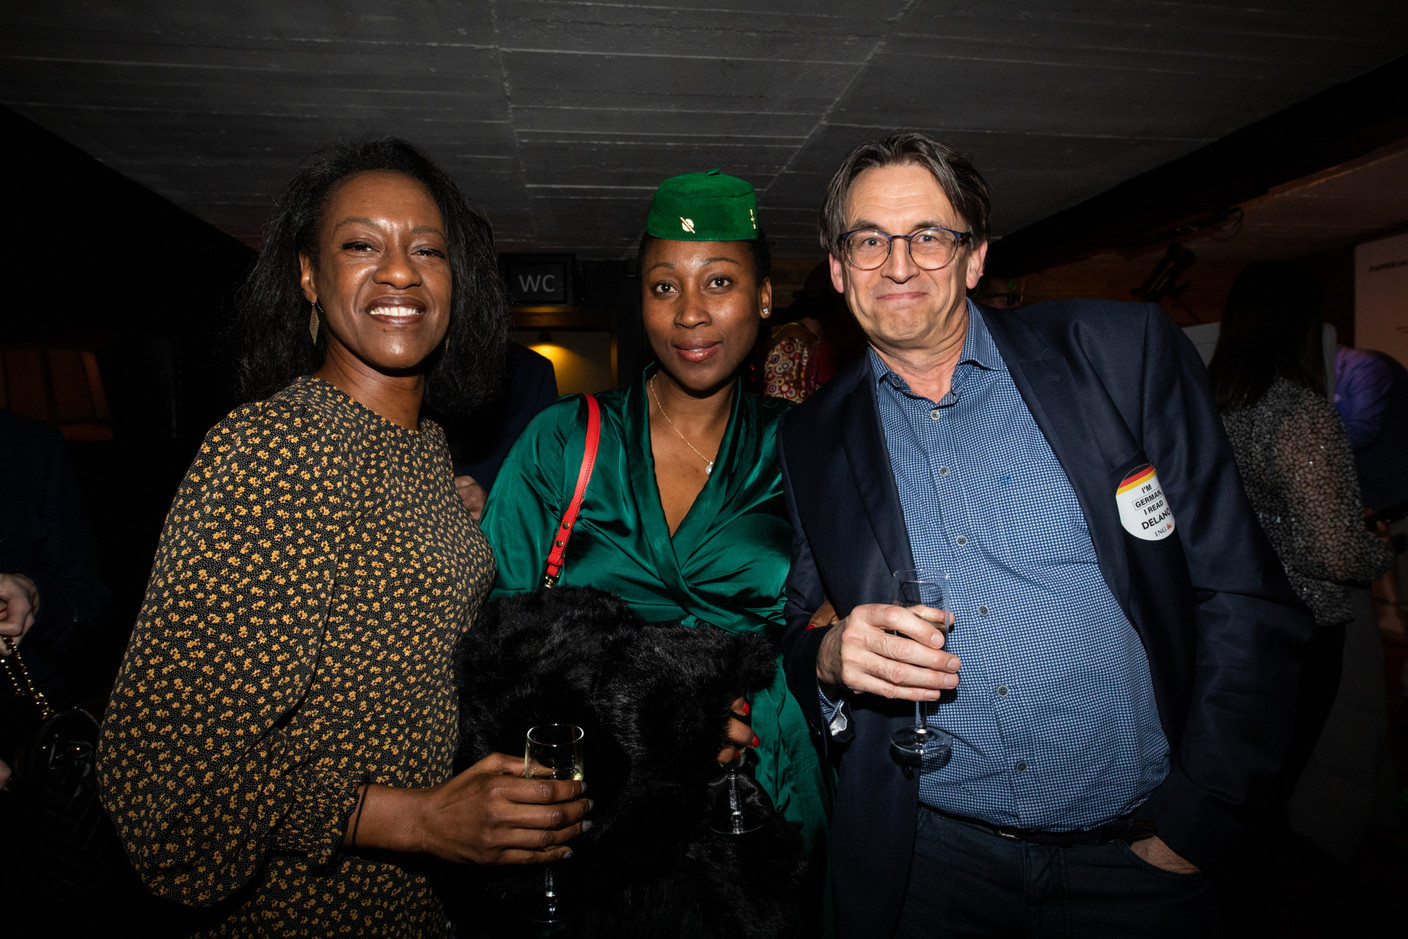 “Everything’s gone green” prize-winner Irene, centre, seen at Delano’s 12th anniversary party, 23 February 2023. Photo: Eva Krins/Maison Moderne